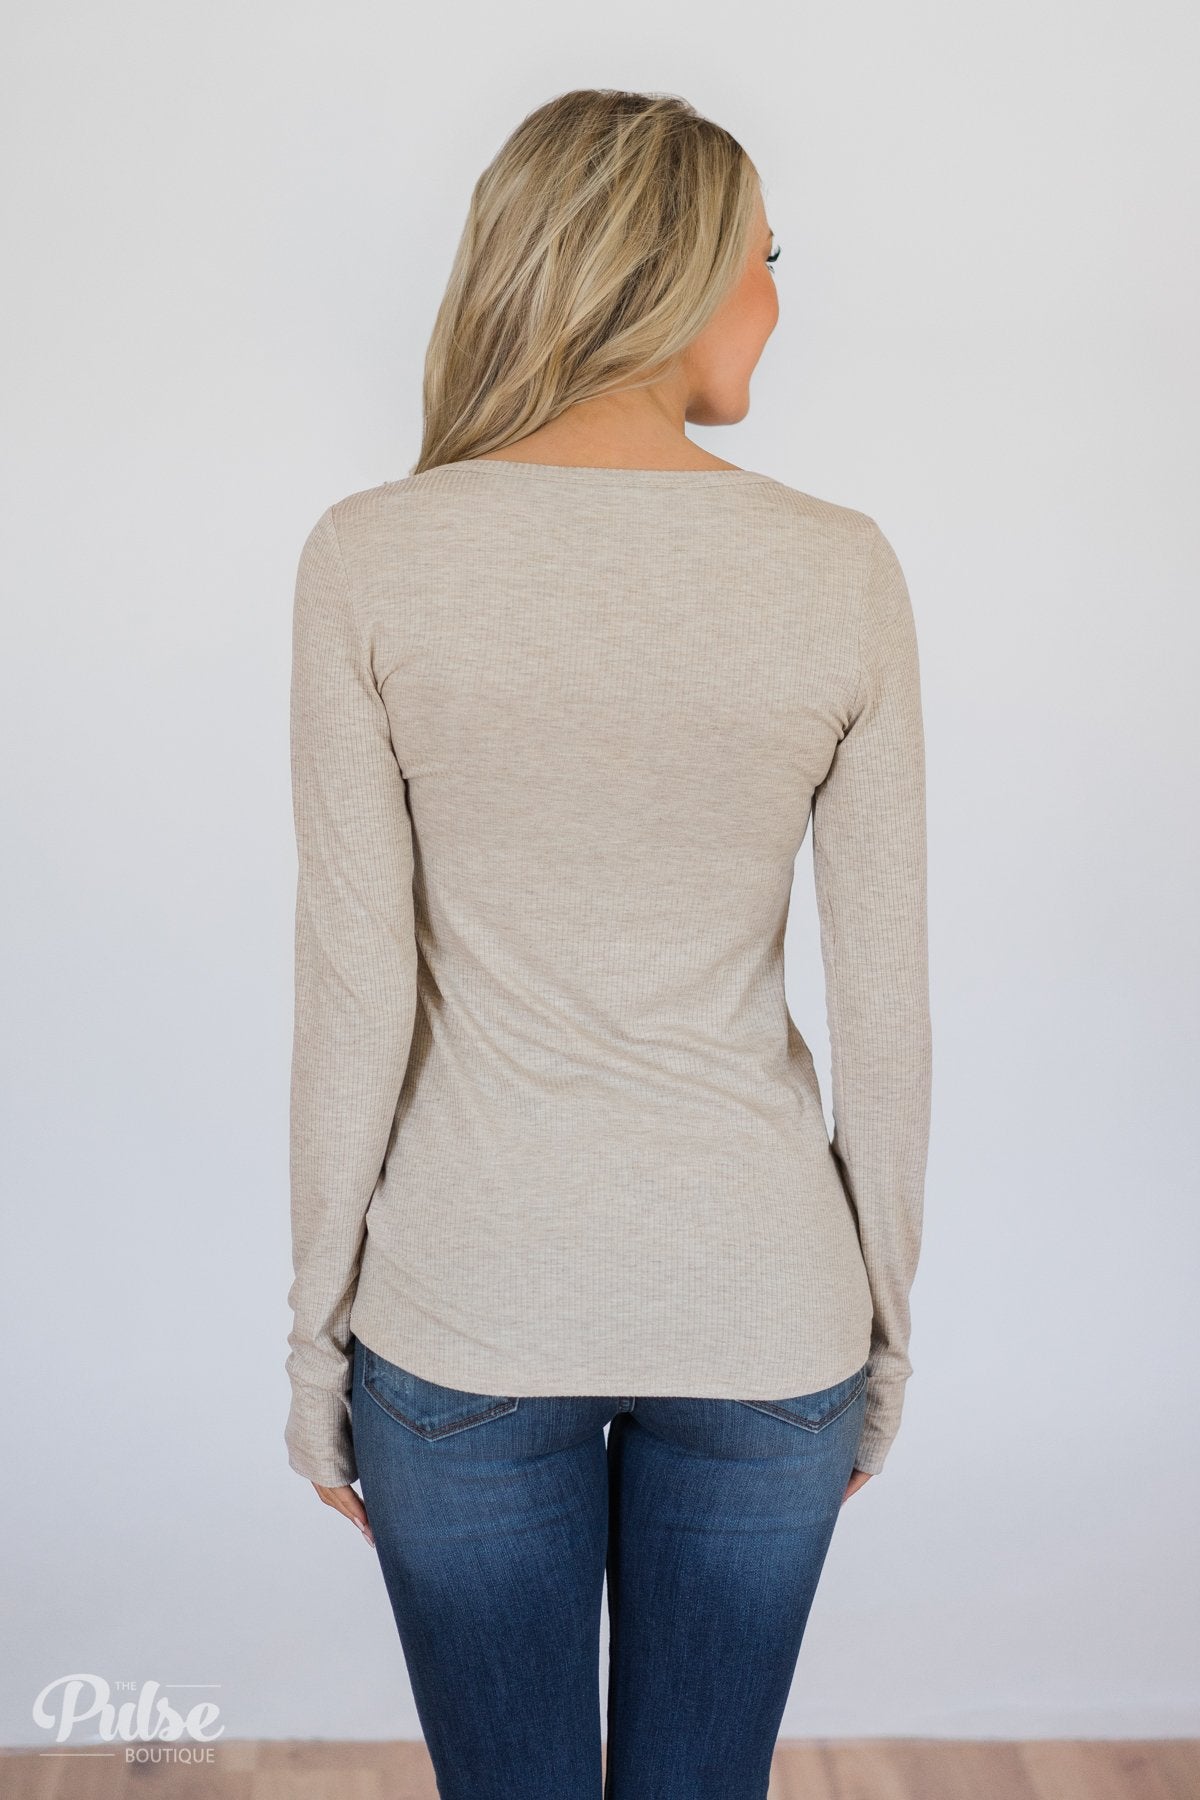 Need You Now 5-Button Henley Top- Oatmeal